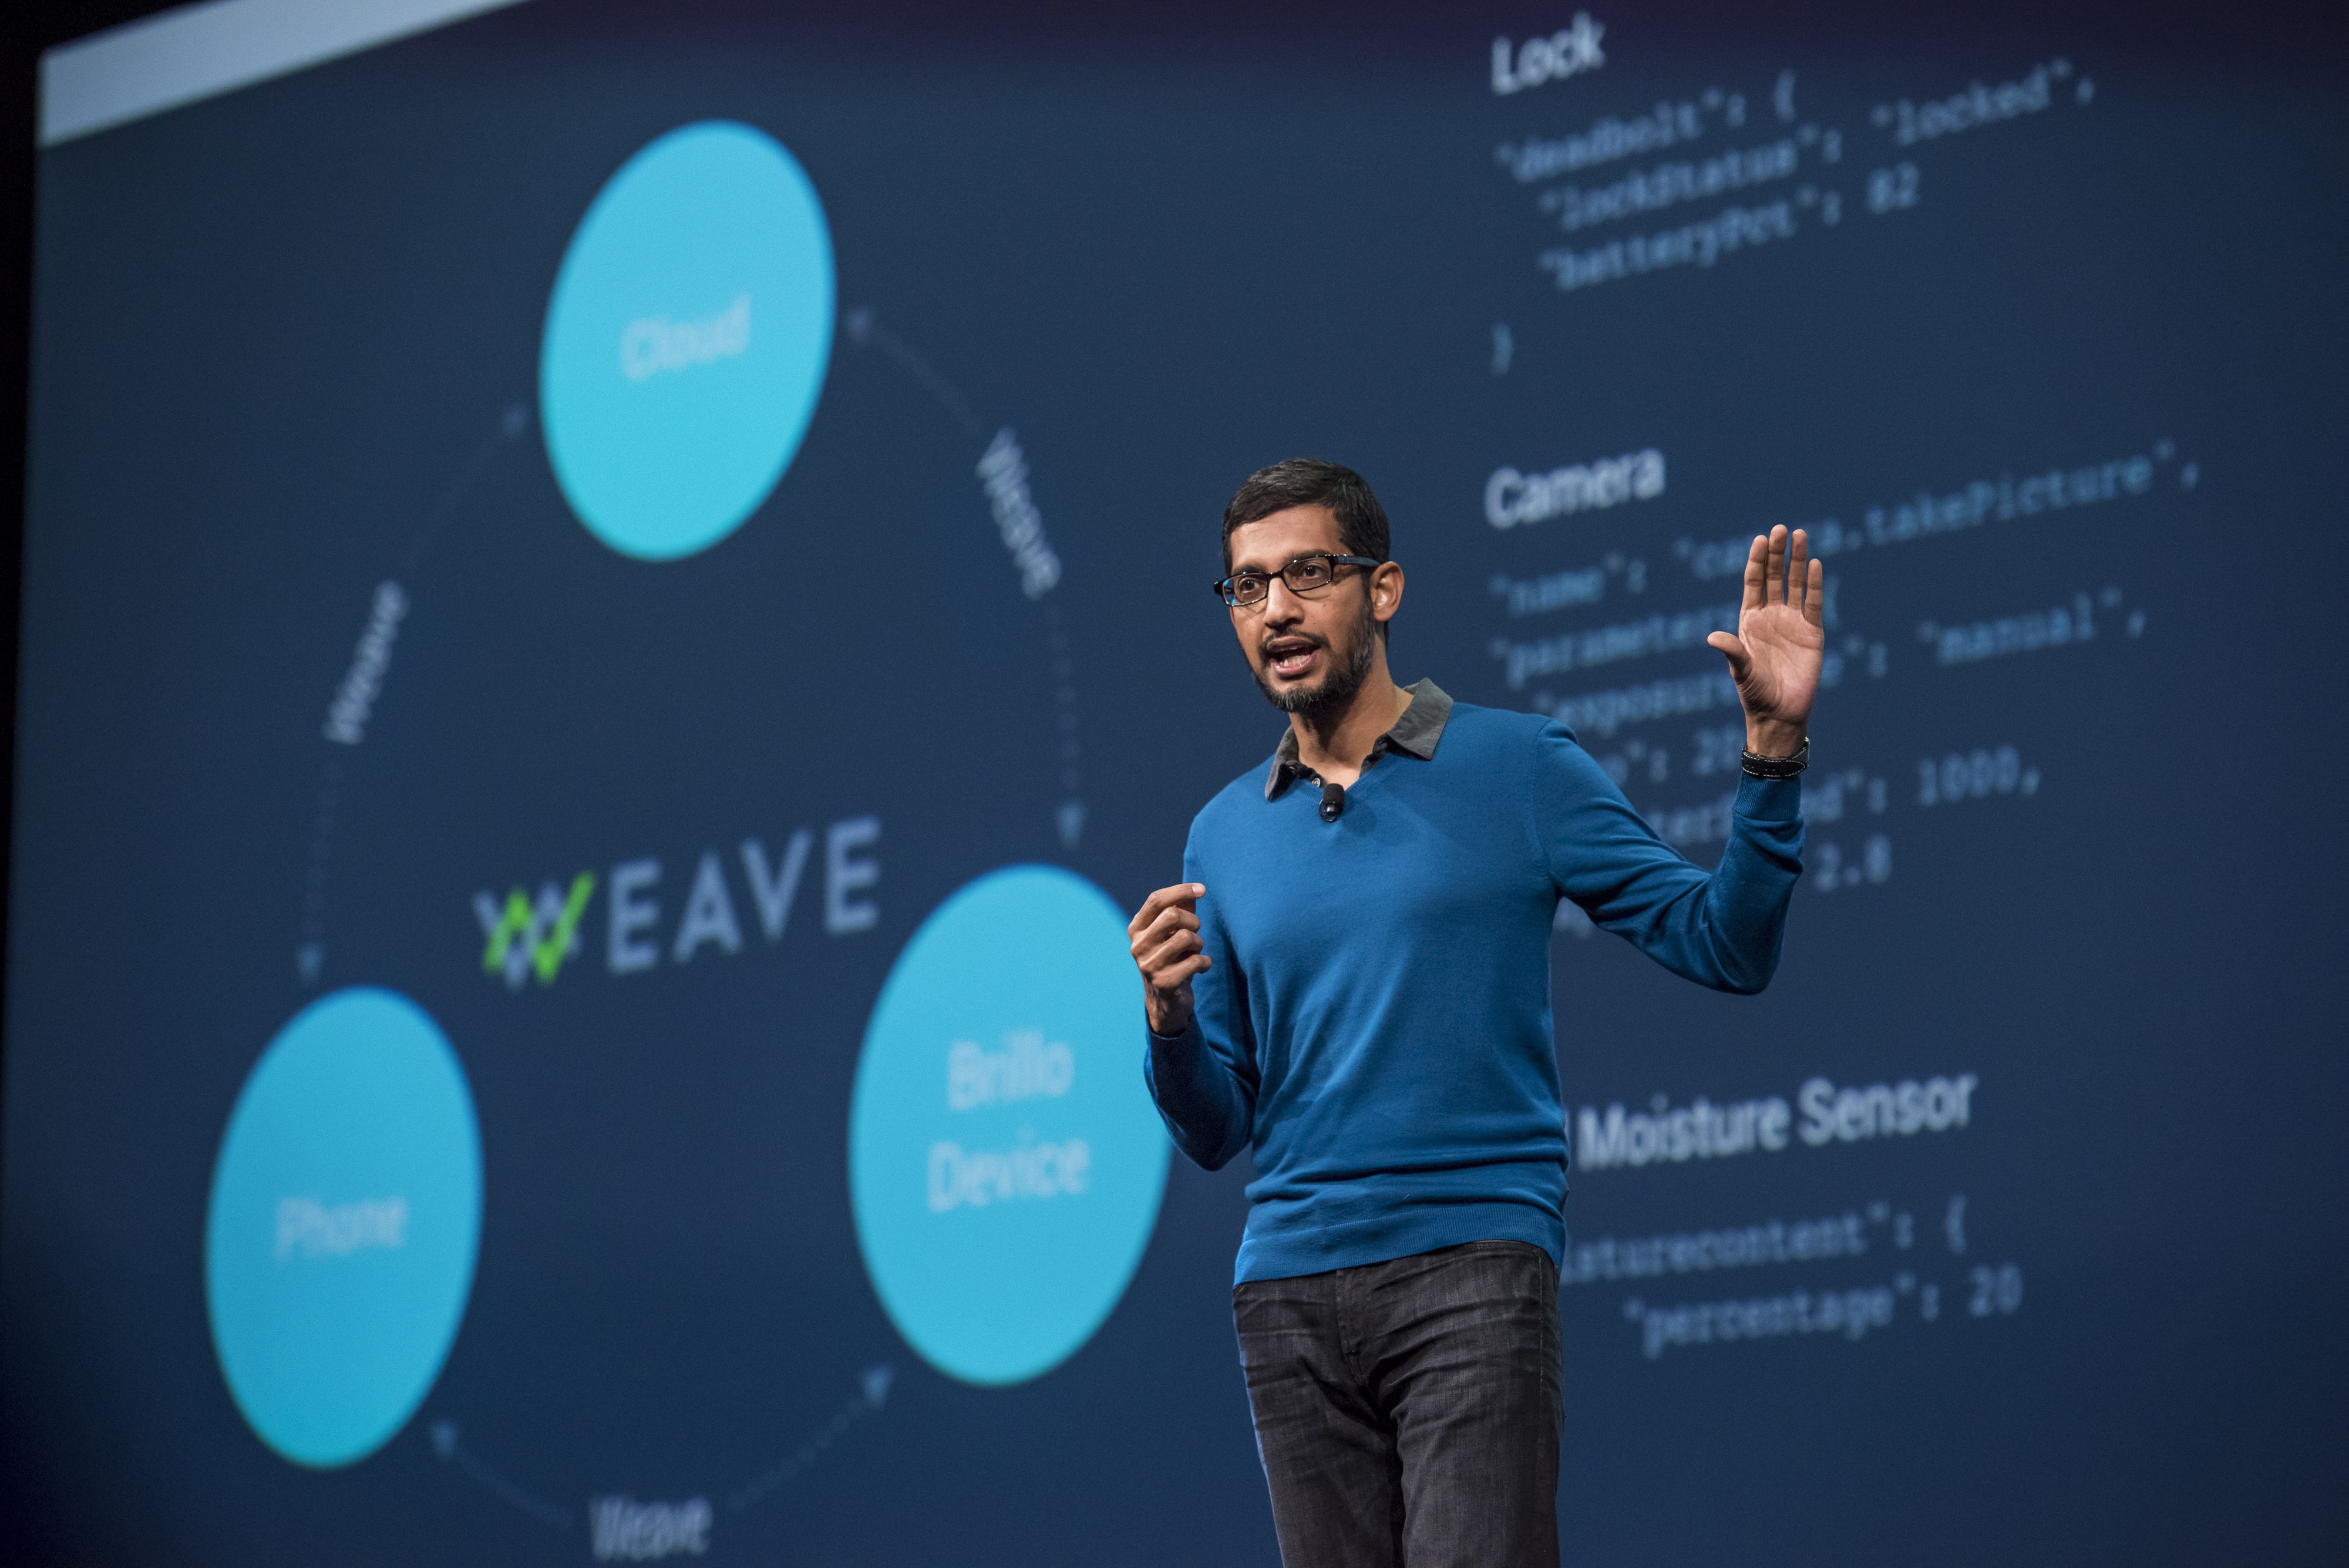 Sundar Pichai, senior vice-president of Products for Google Inc., speaks during the Google I/O Annual Developers Conference in San Francisco on May 28, 2015. (David Paul Morris—Bloomberg/Getty Images)